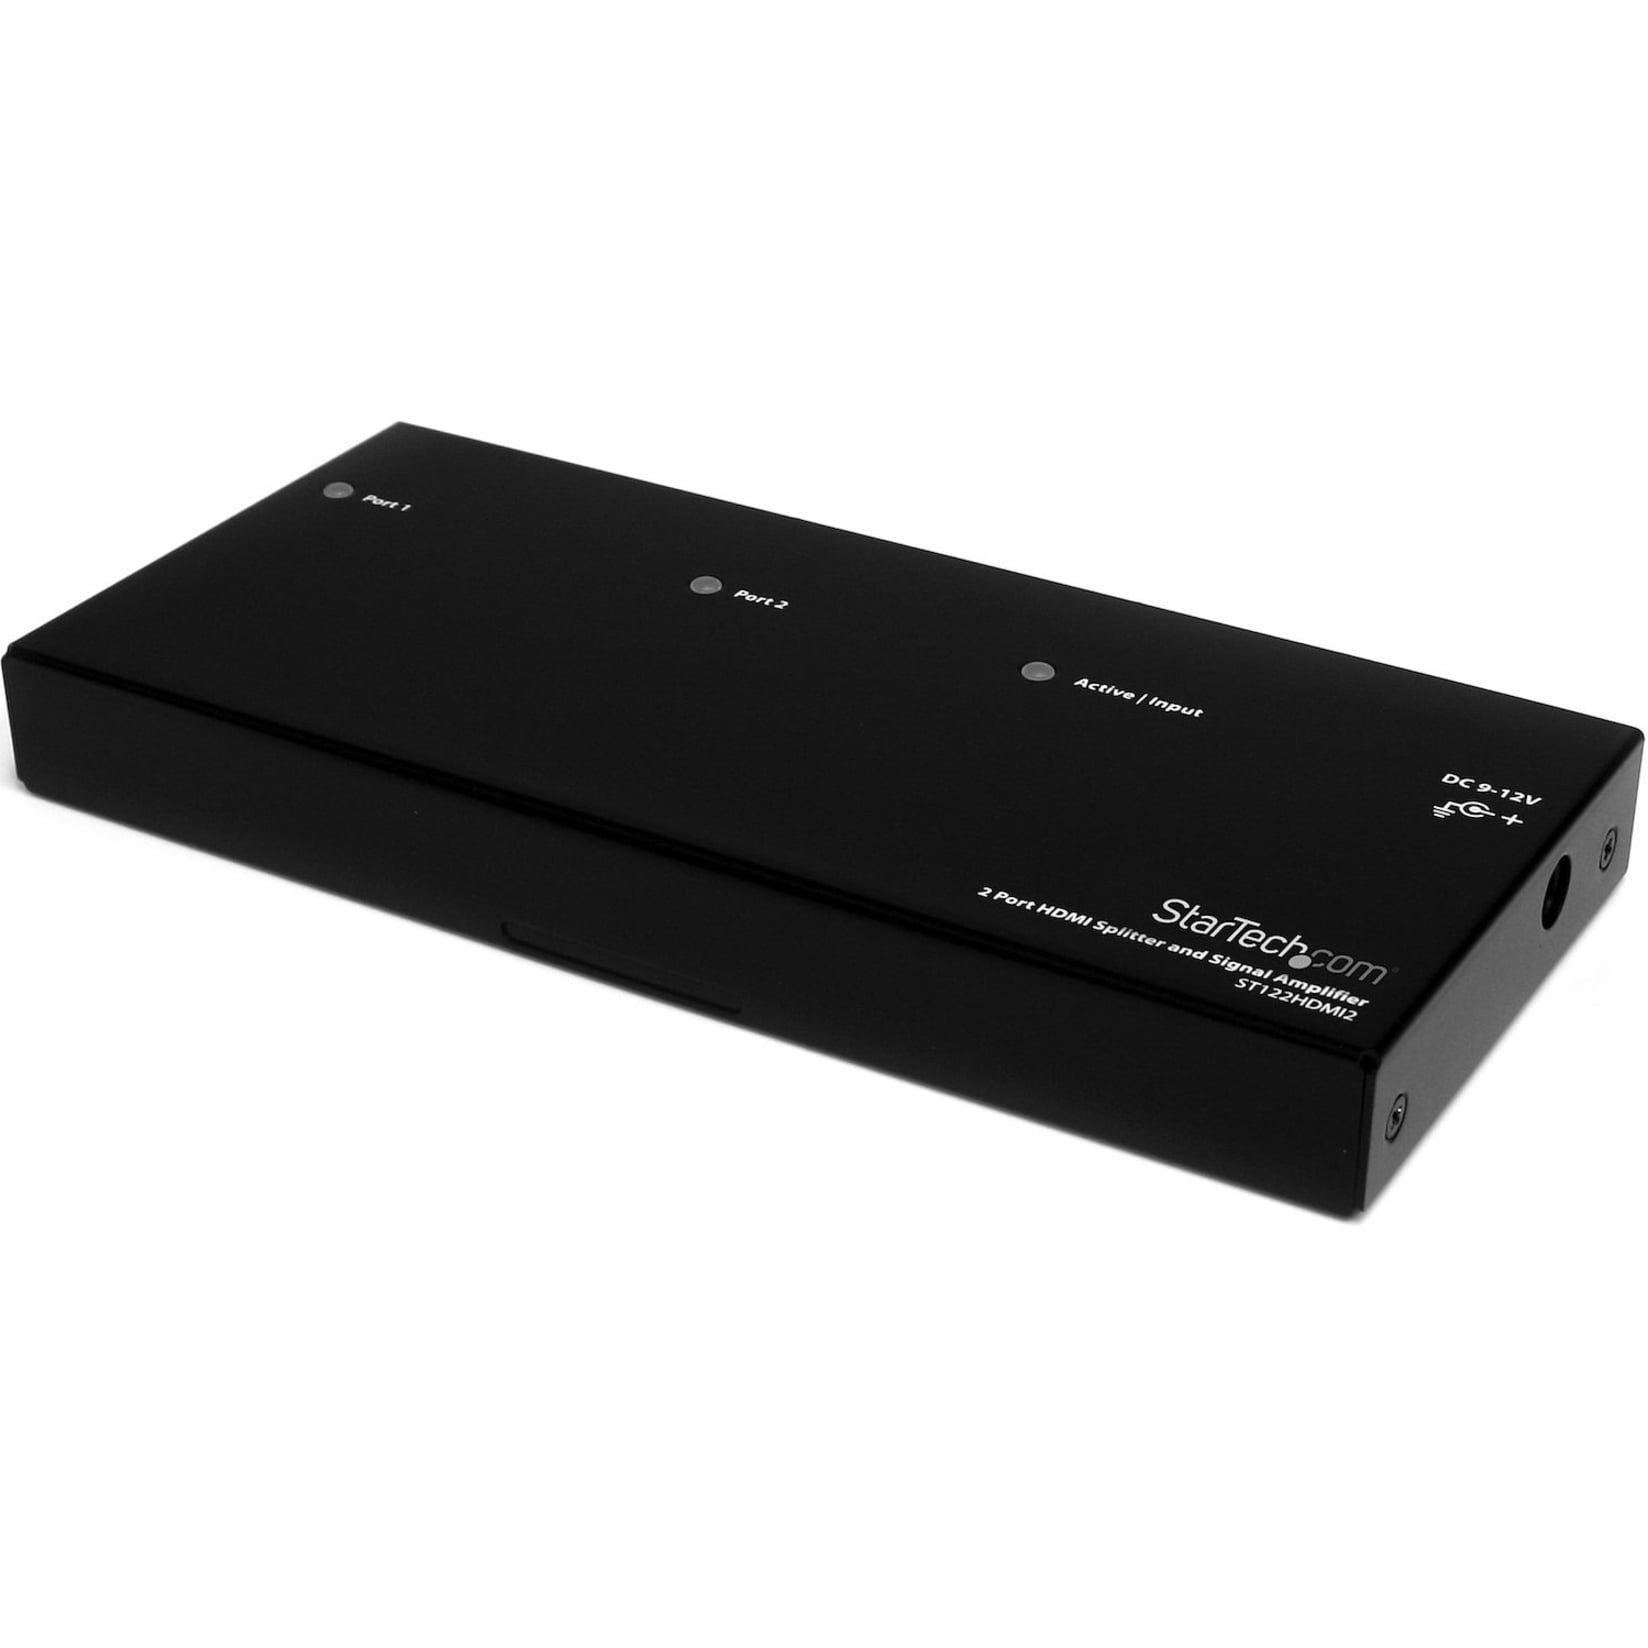 Support Resolution up to 4Kx2K Grey 2-port Switcher Pigtail Type VeLLBox HDMI Bidirectional Switcher 2X1 with Pigtail 2 In 1 Out